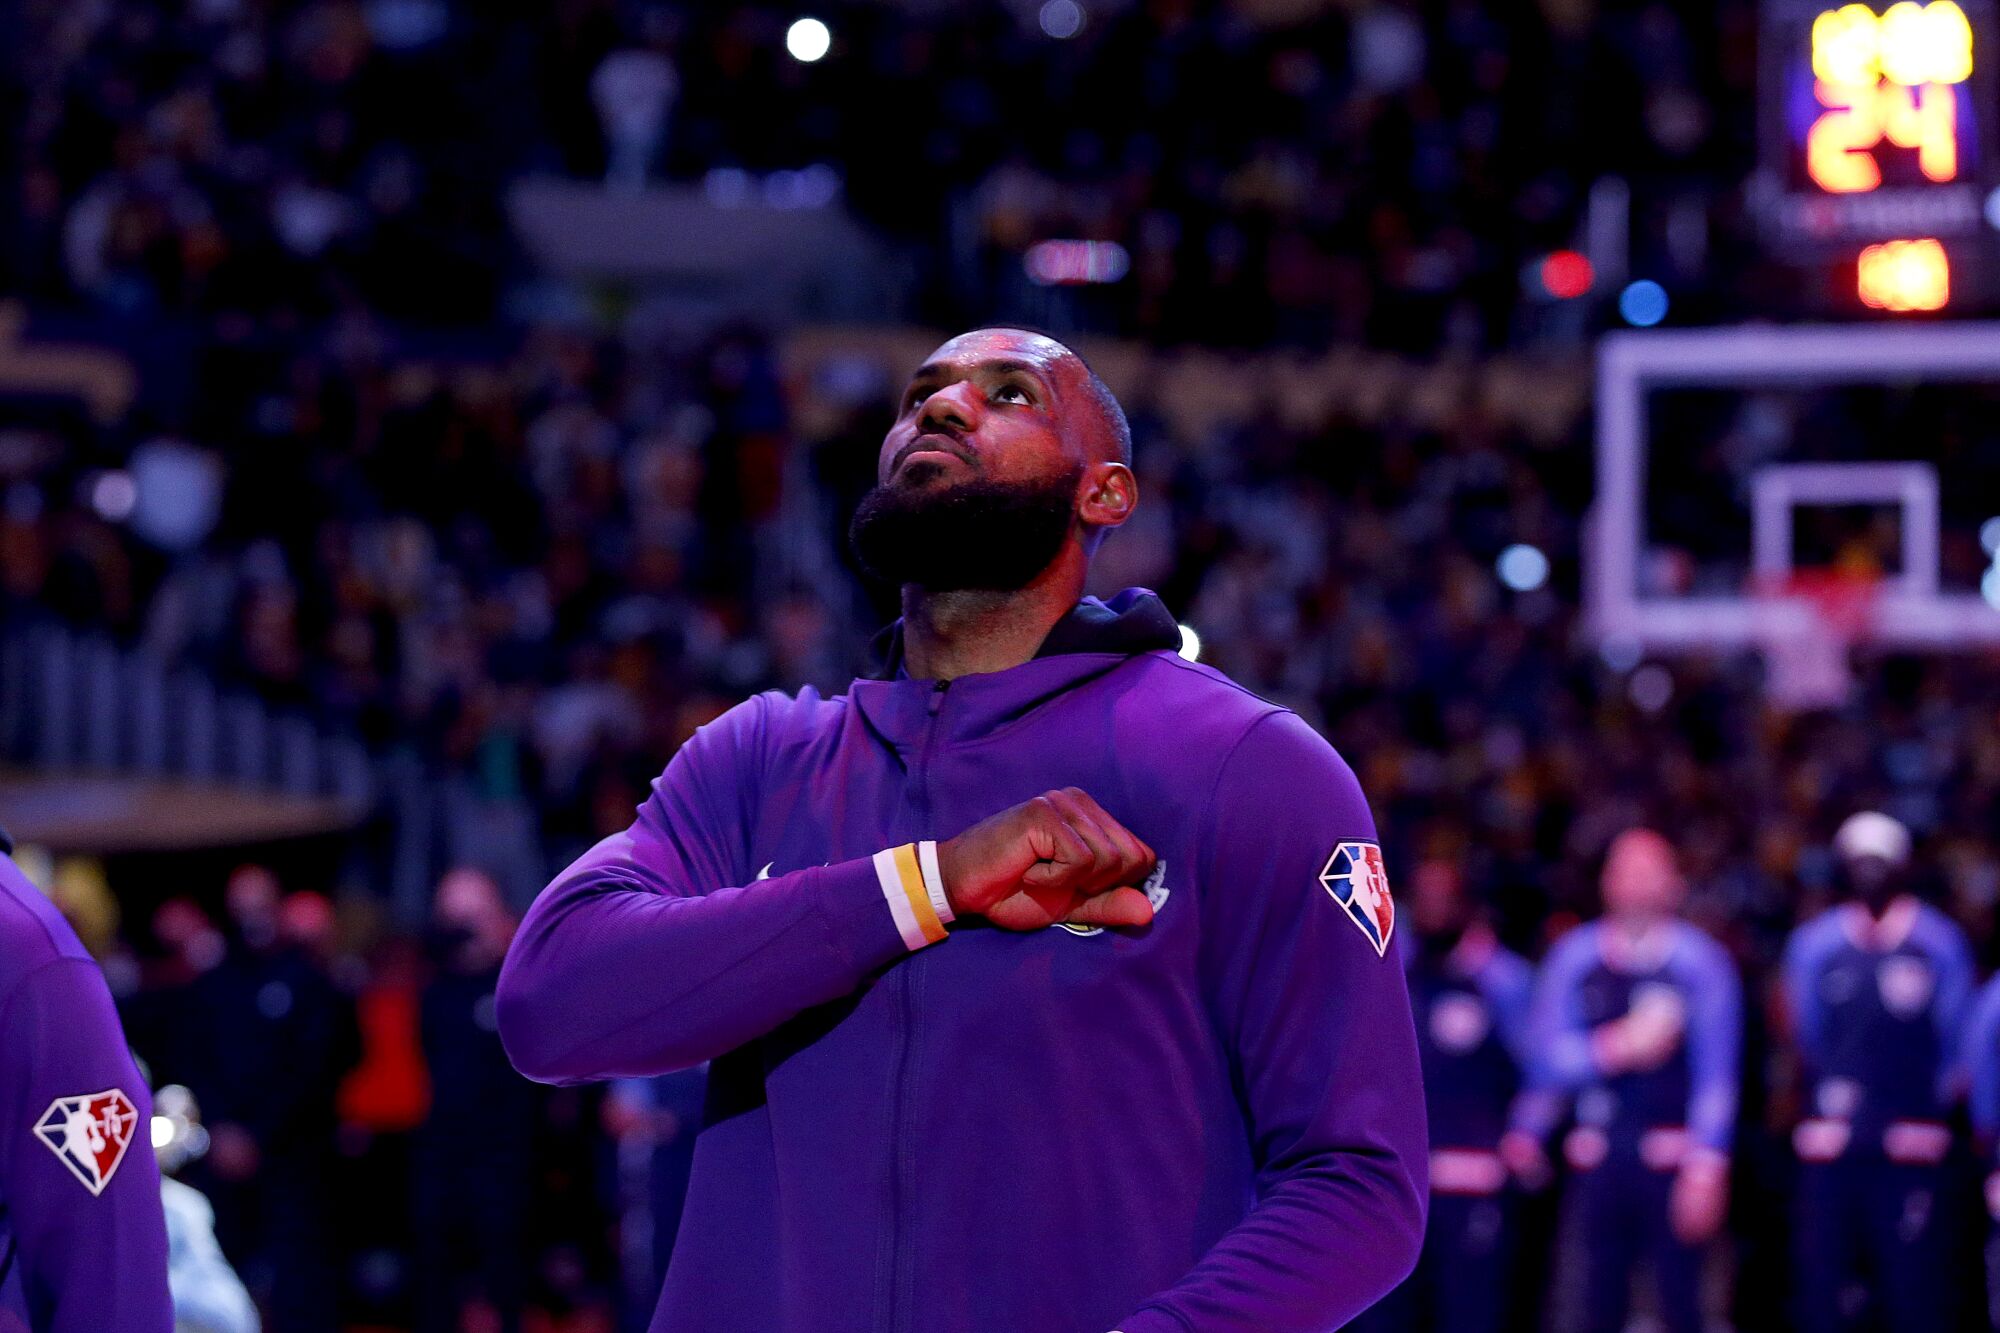 Lakers forward LeBron James gestures before playing the Brooklyn Nets.